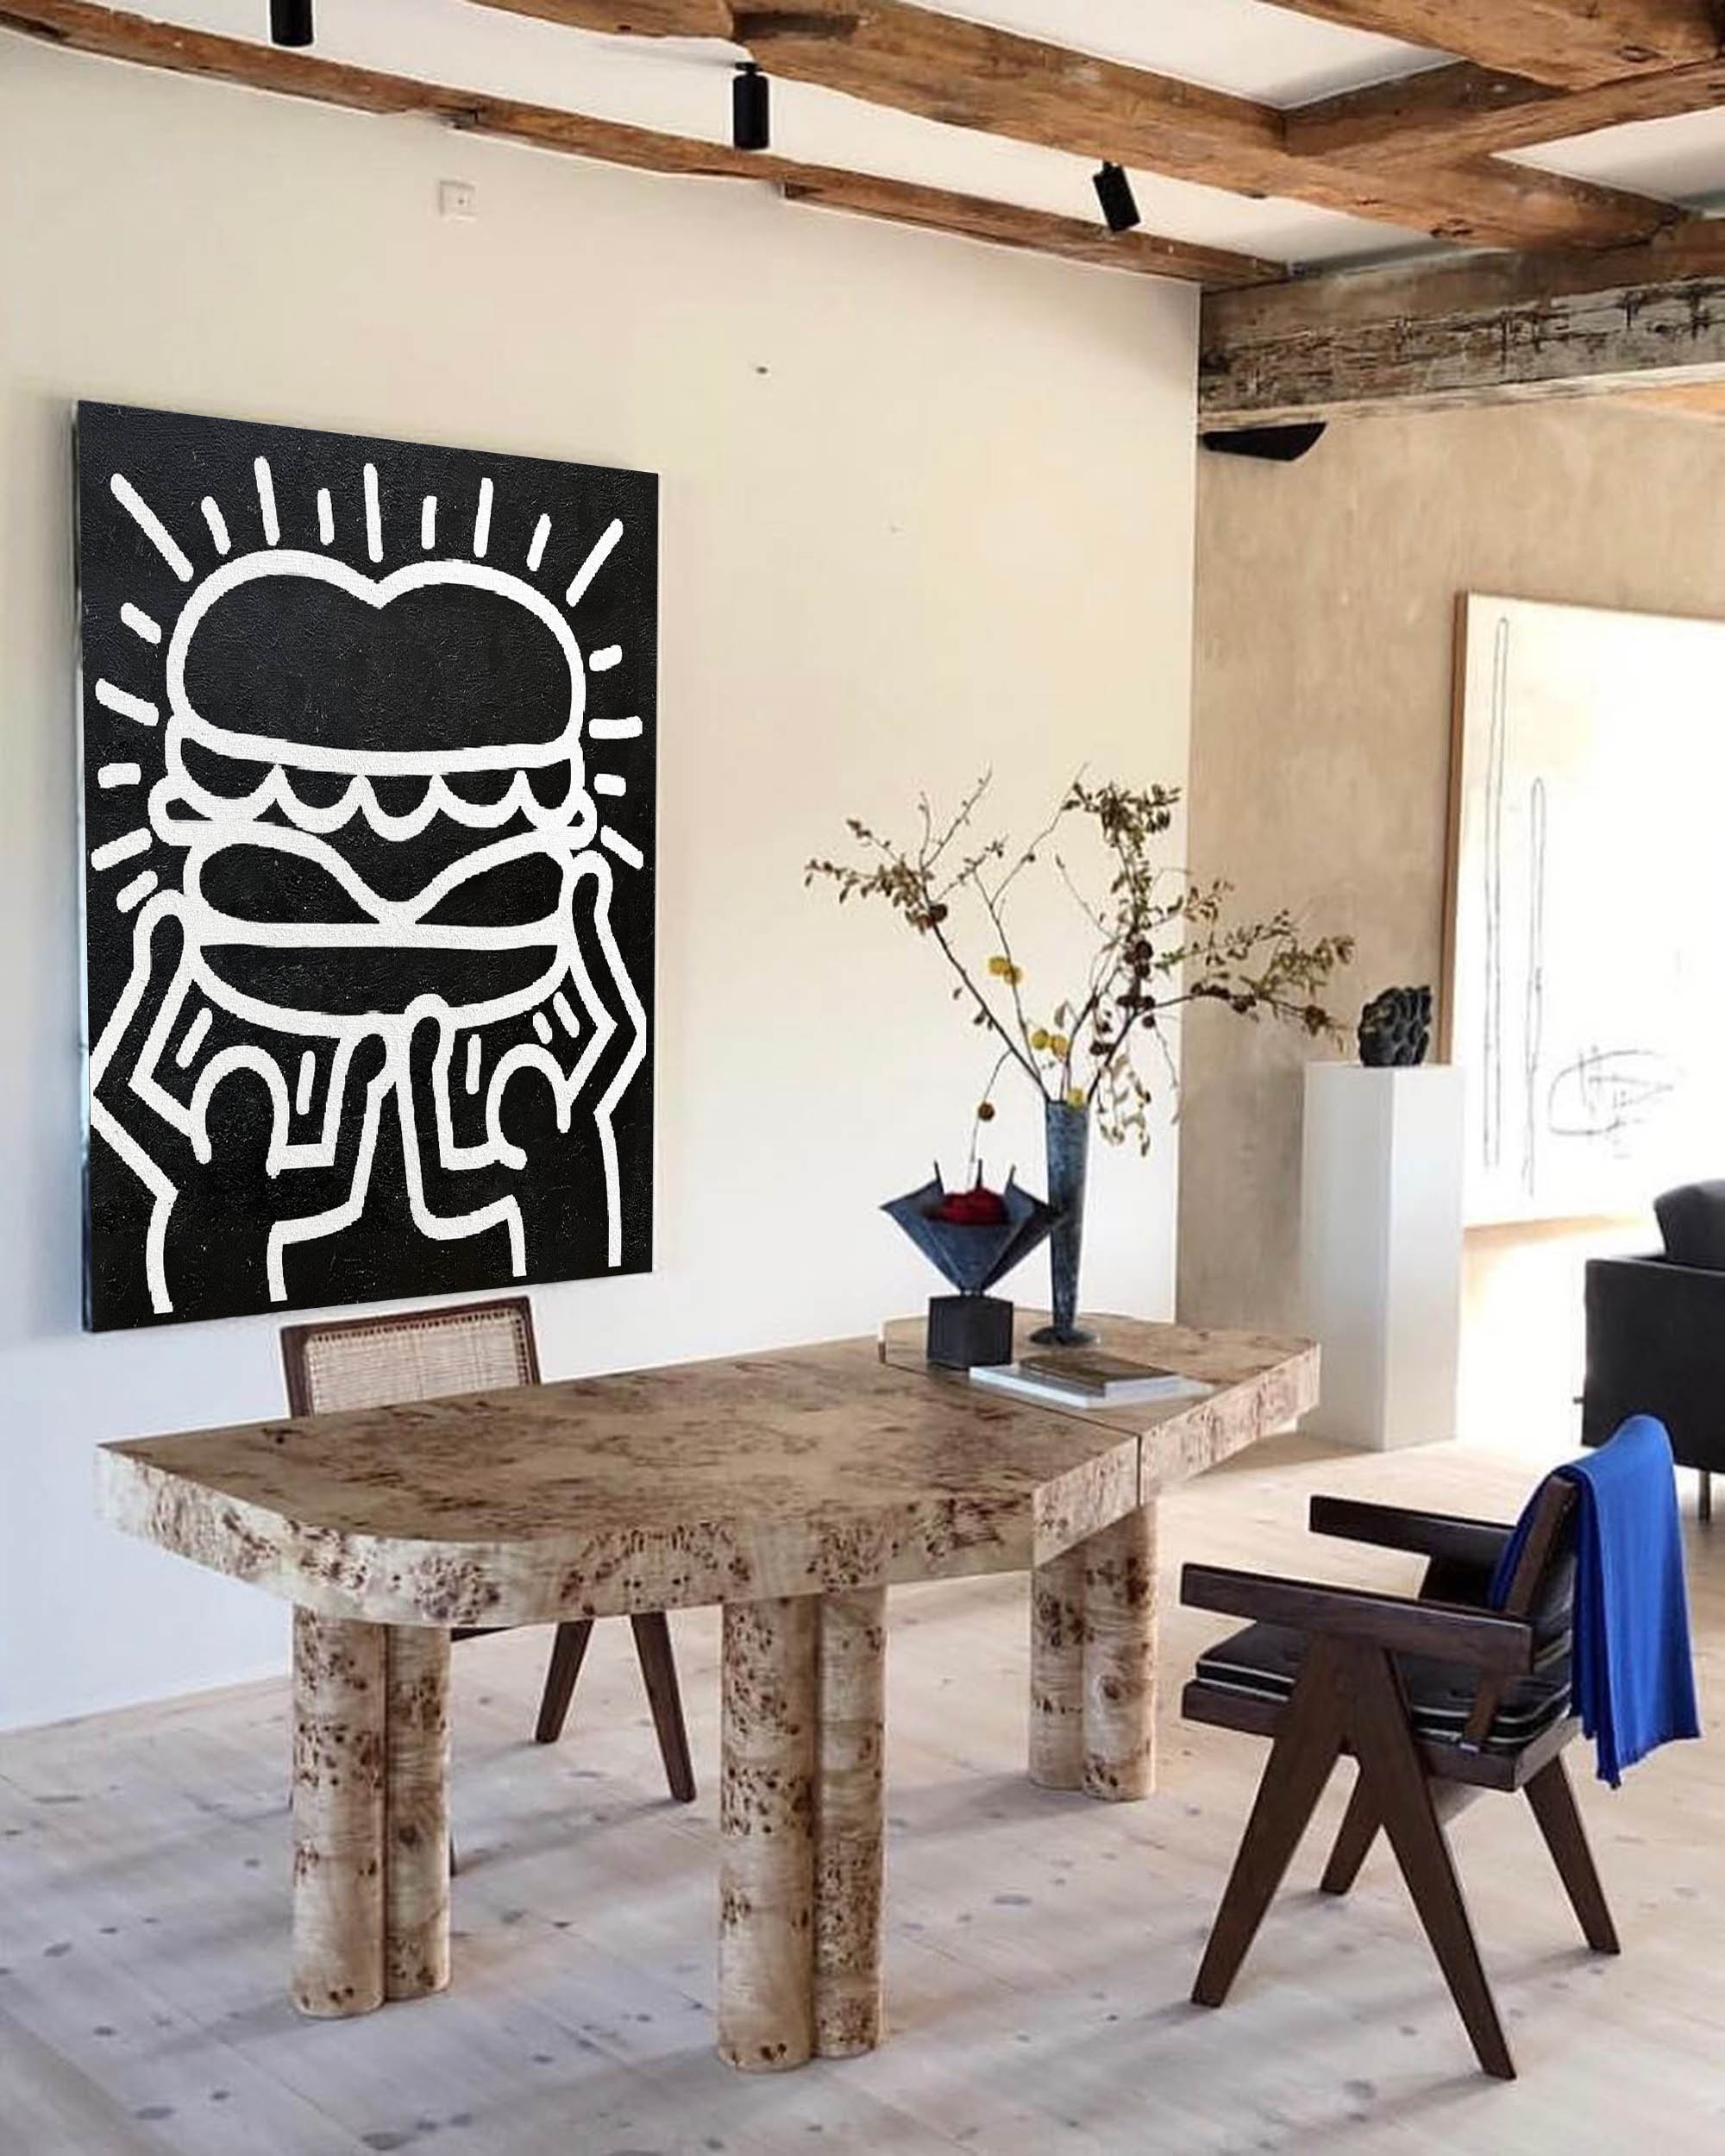 Keith Haring Style Painting #KS013